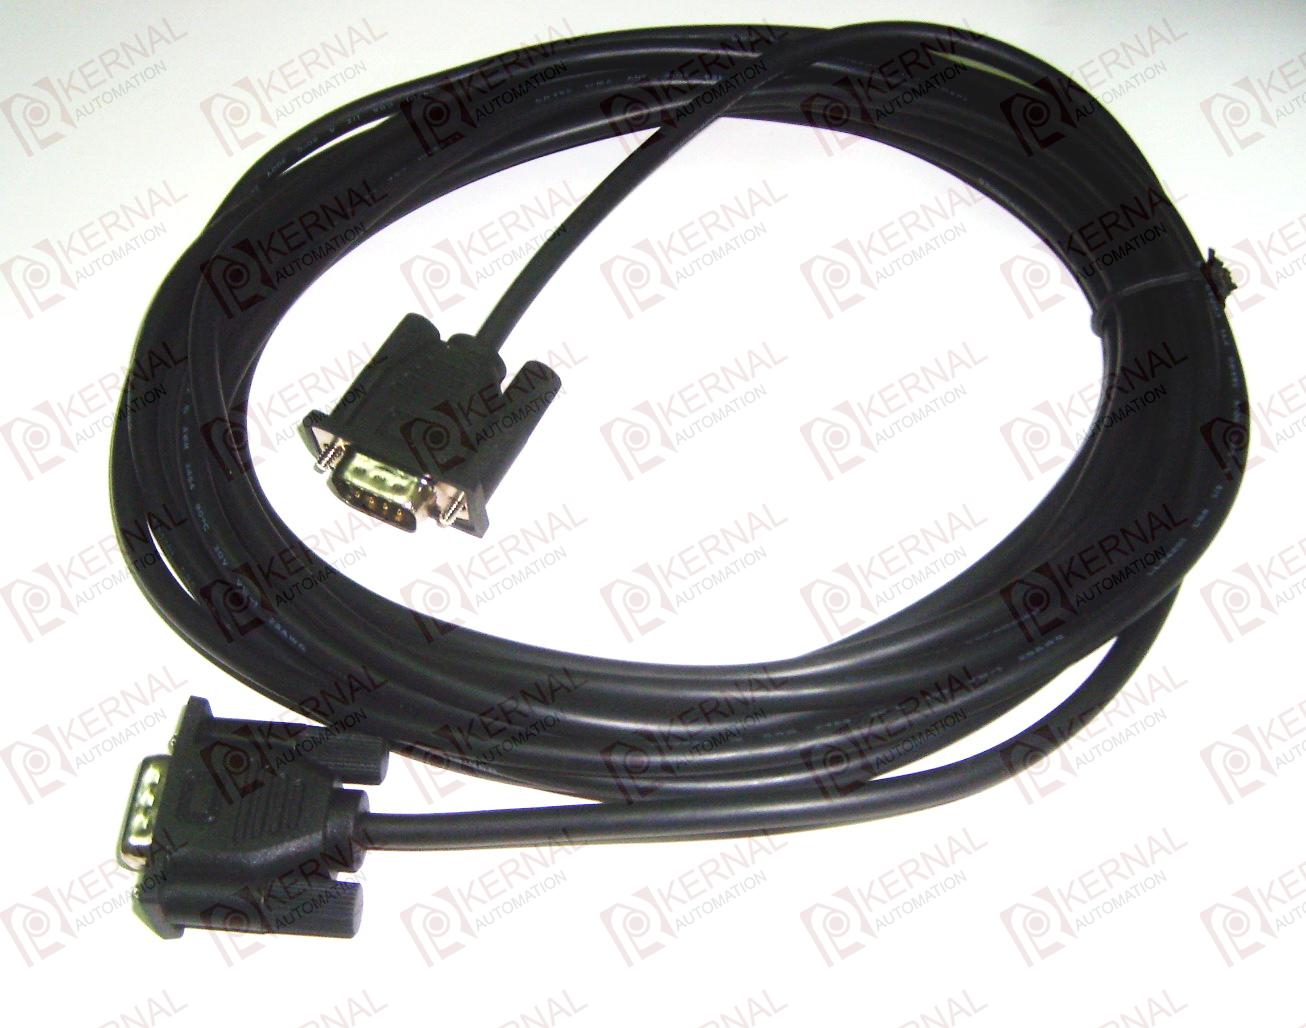 MPI cable:Cable between S7-200/300 PLC and Siemens touch panel, 6ES7901-0BF00-0AA0.